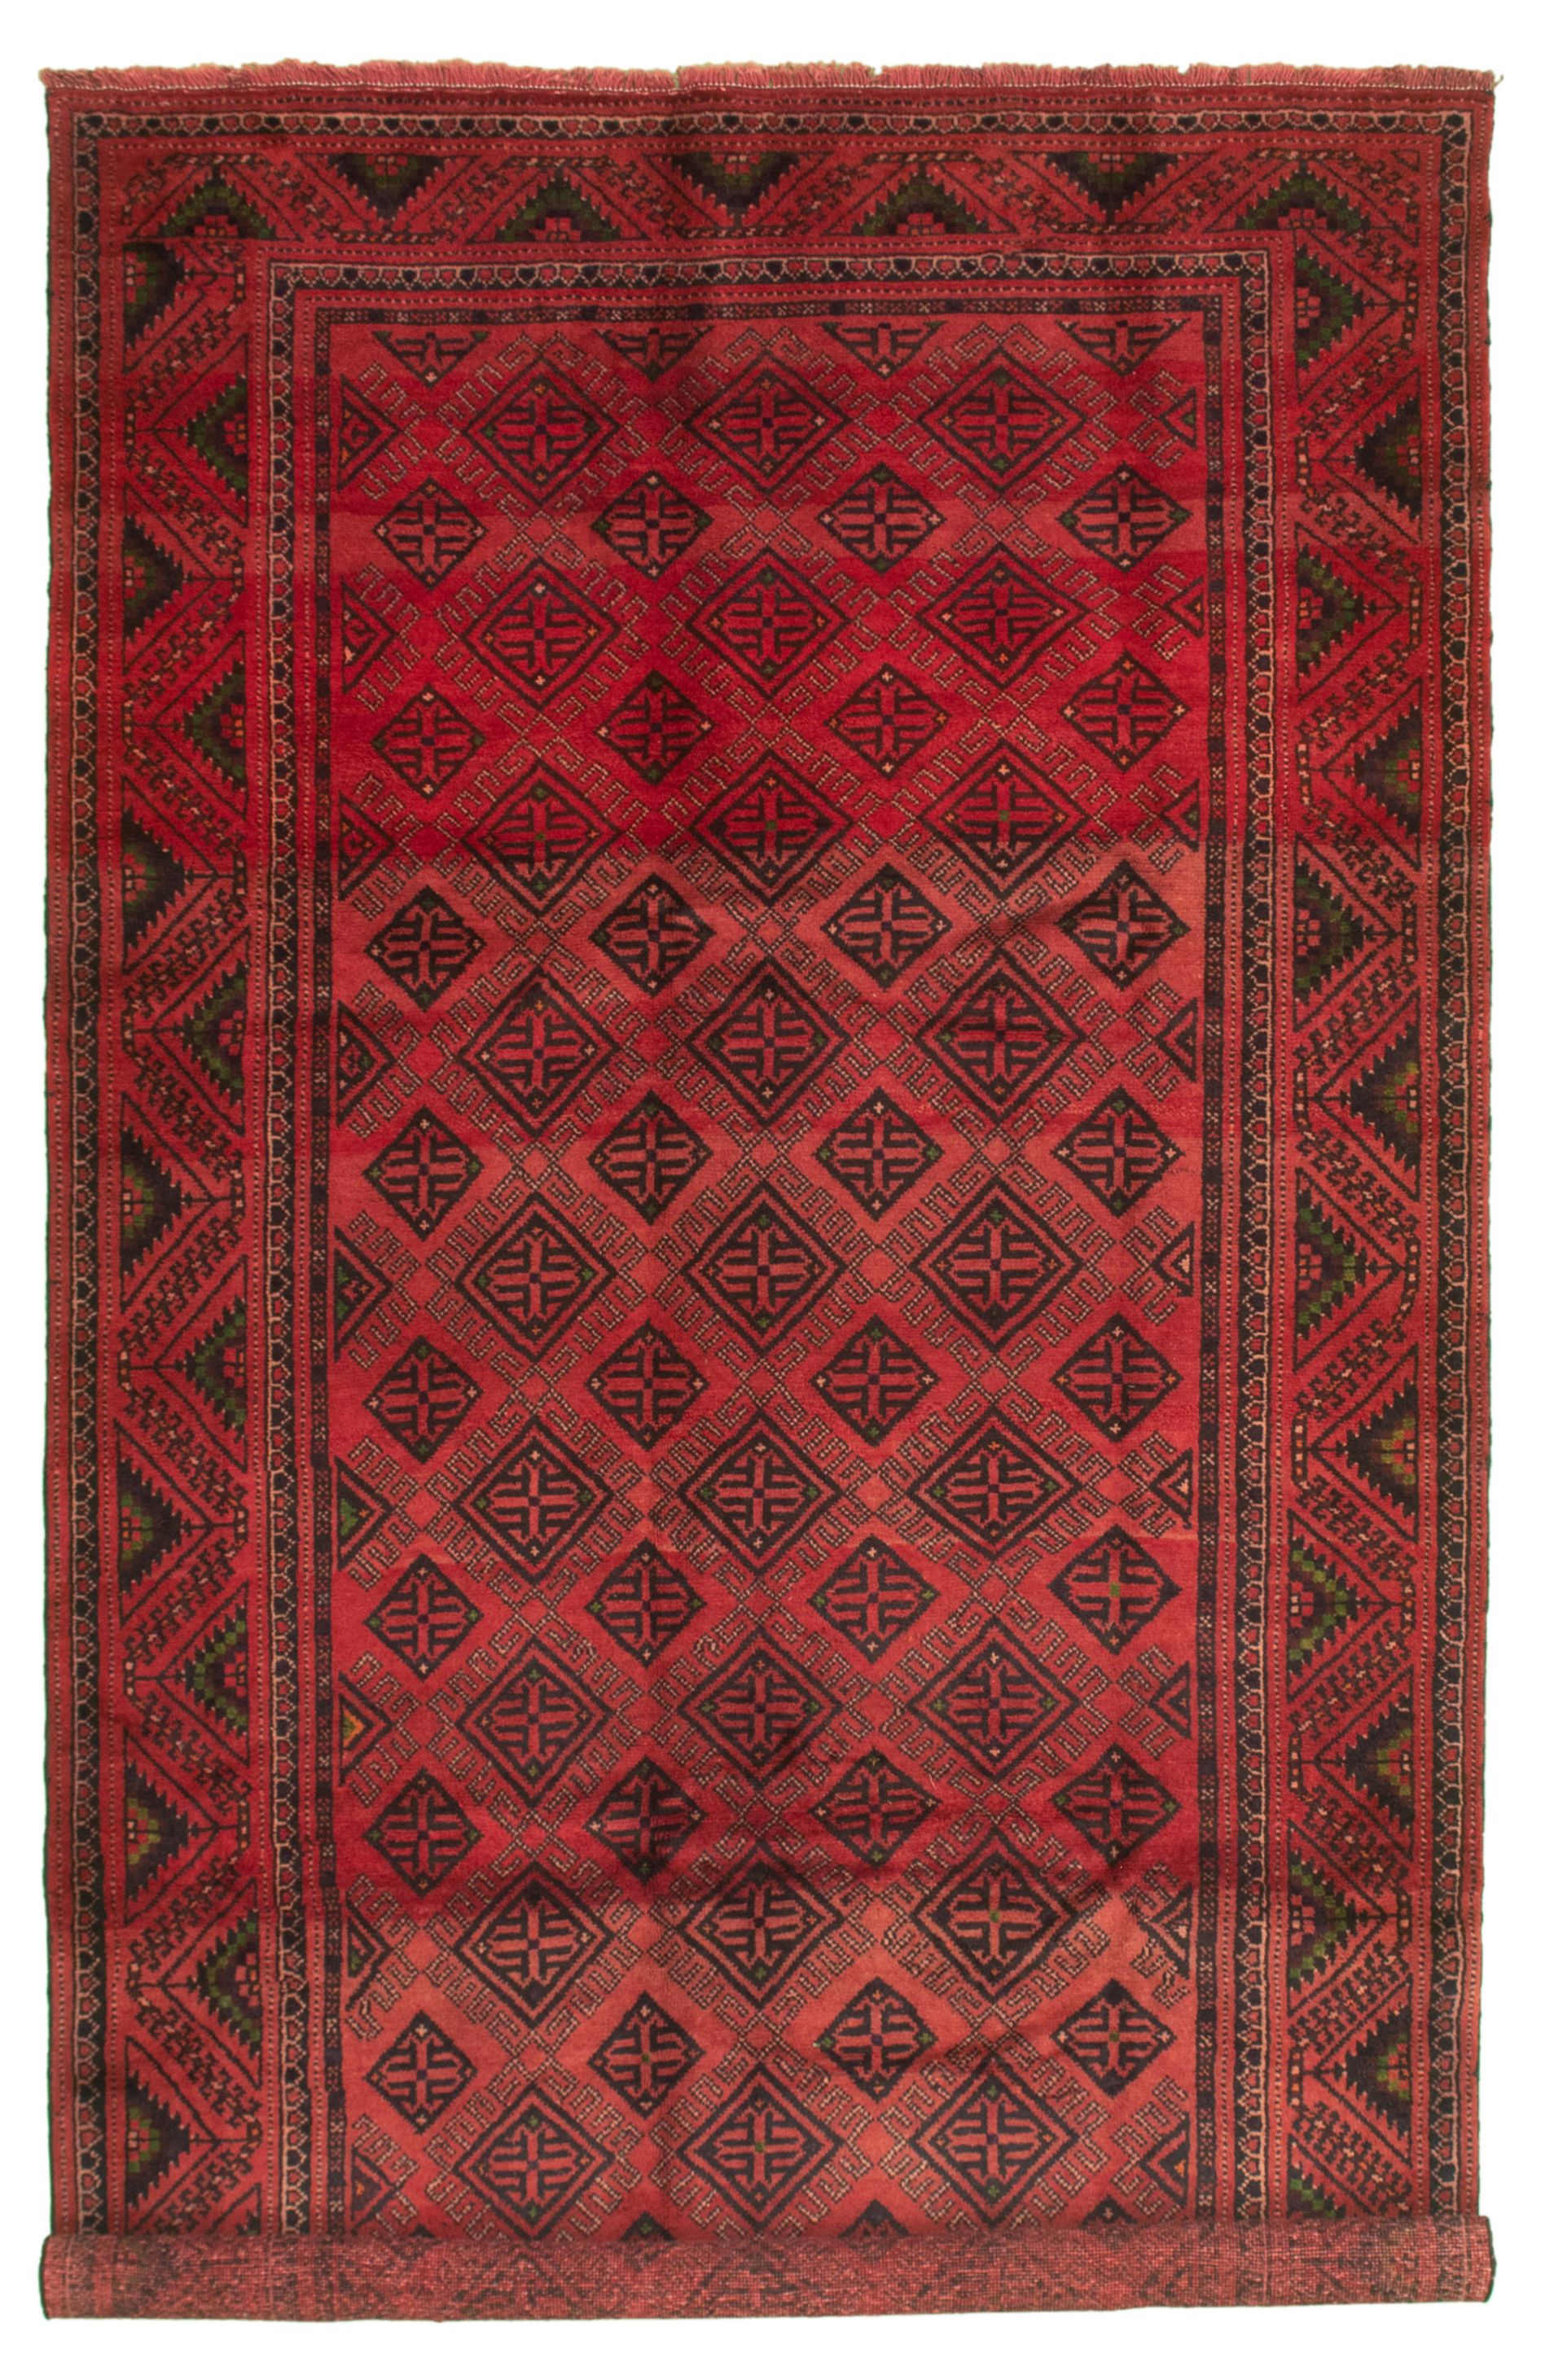 Hand-knotted Authentic Turkish Red Wool Rug 5'7" x 10'2" Size: 5'7" x 10'2"  